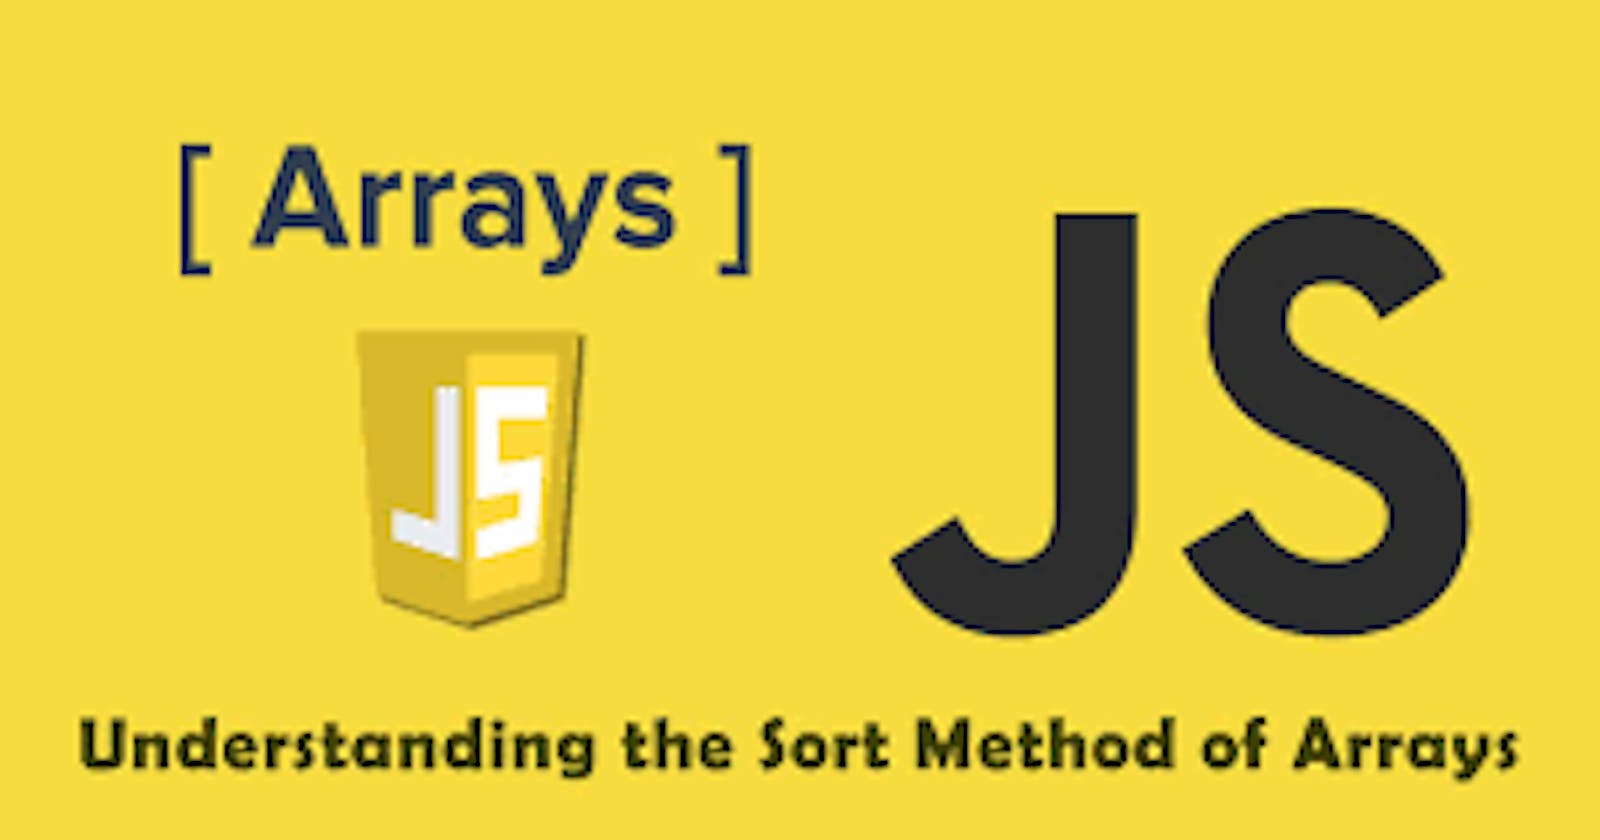 Sorting arrays effectively